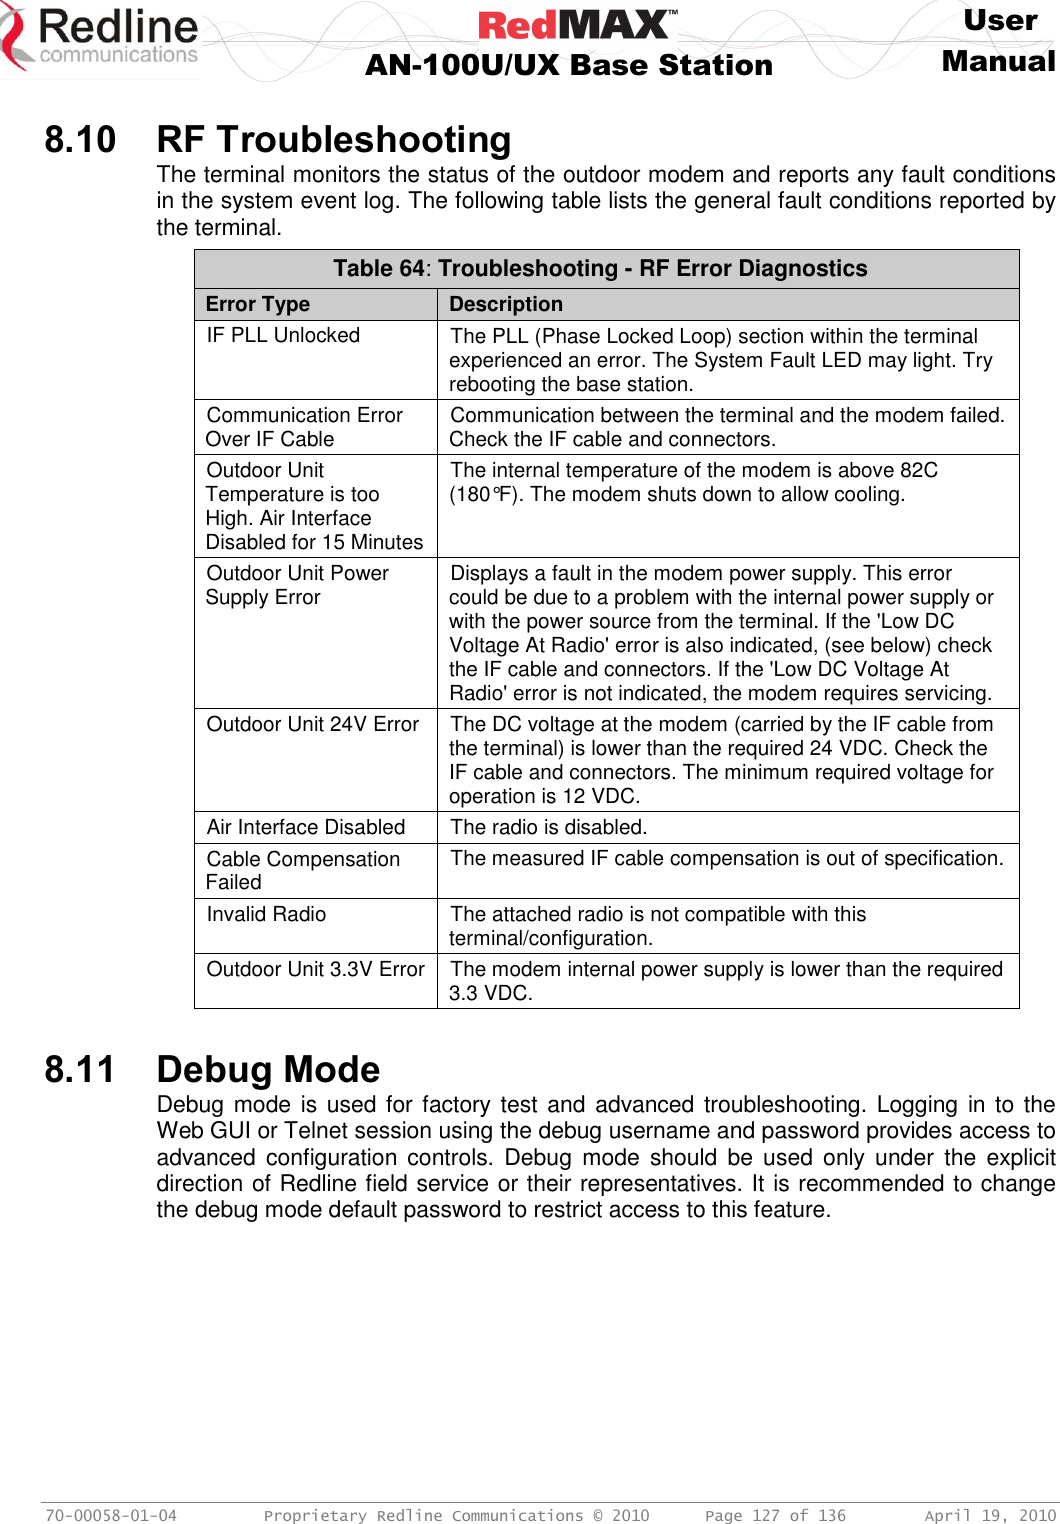     User  AN-100U/UX Base Station Manual   70-00058-01-04  Proprietary Redline Communications © 2010   Page 127 of 136  April 19, 2010  8.10 RF Troubleshooting The terminal monitors the status of the outdoor modem and reports any fault conditions in the system event log. The following table lists the general fault conditions reported by the terminal. Table 64: Troubleshooting - RF Error Diagnostics Error Type Description IF PLL Unlocked The PLL (Phase Locked Loop) section within the terminal experienced an error. The System Fault LED may light. Try rebooting the base station. Communication Error Over IF Cable Communication between the terminal and the modem failed. Check the IF cable and connectors. Outdoor Unit Temperature is too High. Air Interface Disabled for 15 Minutes The internal temperature of the modem is above 82C (180°F). The modem shuts down to allow cooling. Outdoor Unit Power Supply Error Displays a fault in the modem power supply. This error could be due to a problem with the internal power supply or with the power source from the terminal. If the &apos;Low DC Voltage At Radio&apos; error is also indicated, (see below) check the IF cable and connectors. If the &apos;Low DC Voltage At Radio&apos; error is not indicated, the modem requires servicing. Outdoor Unit 24V Error The DC voltage at the modem (carried by the IF cable from the terminal) is lower than the required 24 VDC. Check the IF cable and connectors. The minimum required voltage for operation is 12 VDC. Air Interface Disabled The radio is disabled. Cable Compensation Failed The measured IF cable compensation is out of specification. Invalid Radio The attached radio is not compatible with this terminal/configuration. Outdoor Unit 3.3V Error The modem internal power supply is lower than the required 3.3 VDC.   8.11 Debug Mode Debug mode is used for factory test and advanced troubleshooting. Logging  in to the Web GUI or Telnet session using the debug username and password provides access to advanced configuration  controls.  Debug  mode  should  be  used  only  under  the  explicit direction of Redline field service or their representatives. It is recommended to change the debug mode default password to restrict access to this feature. 